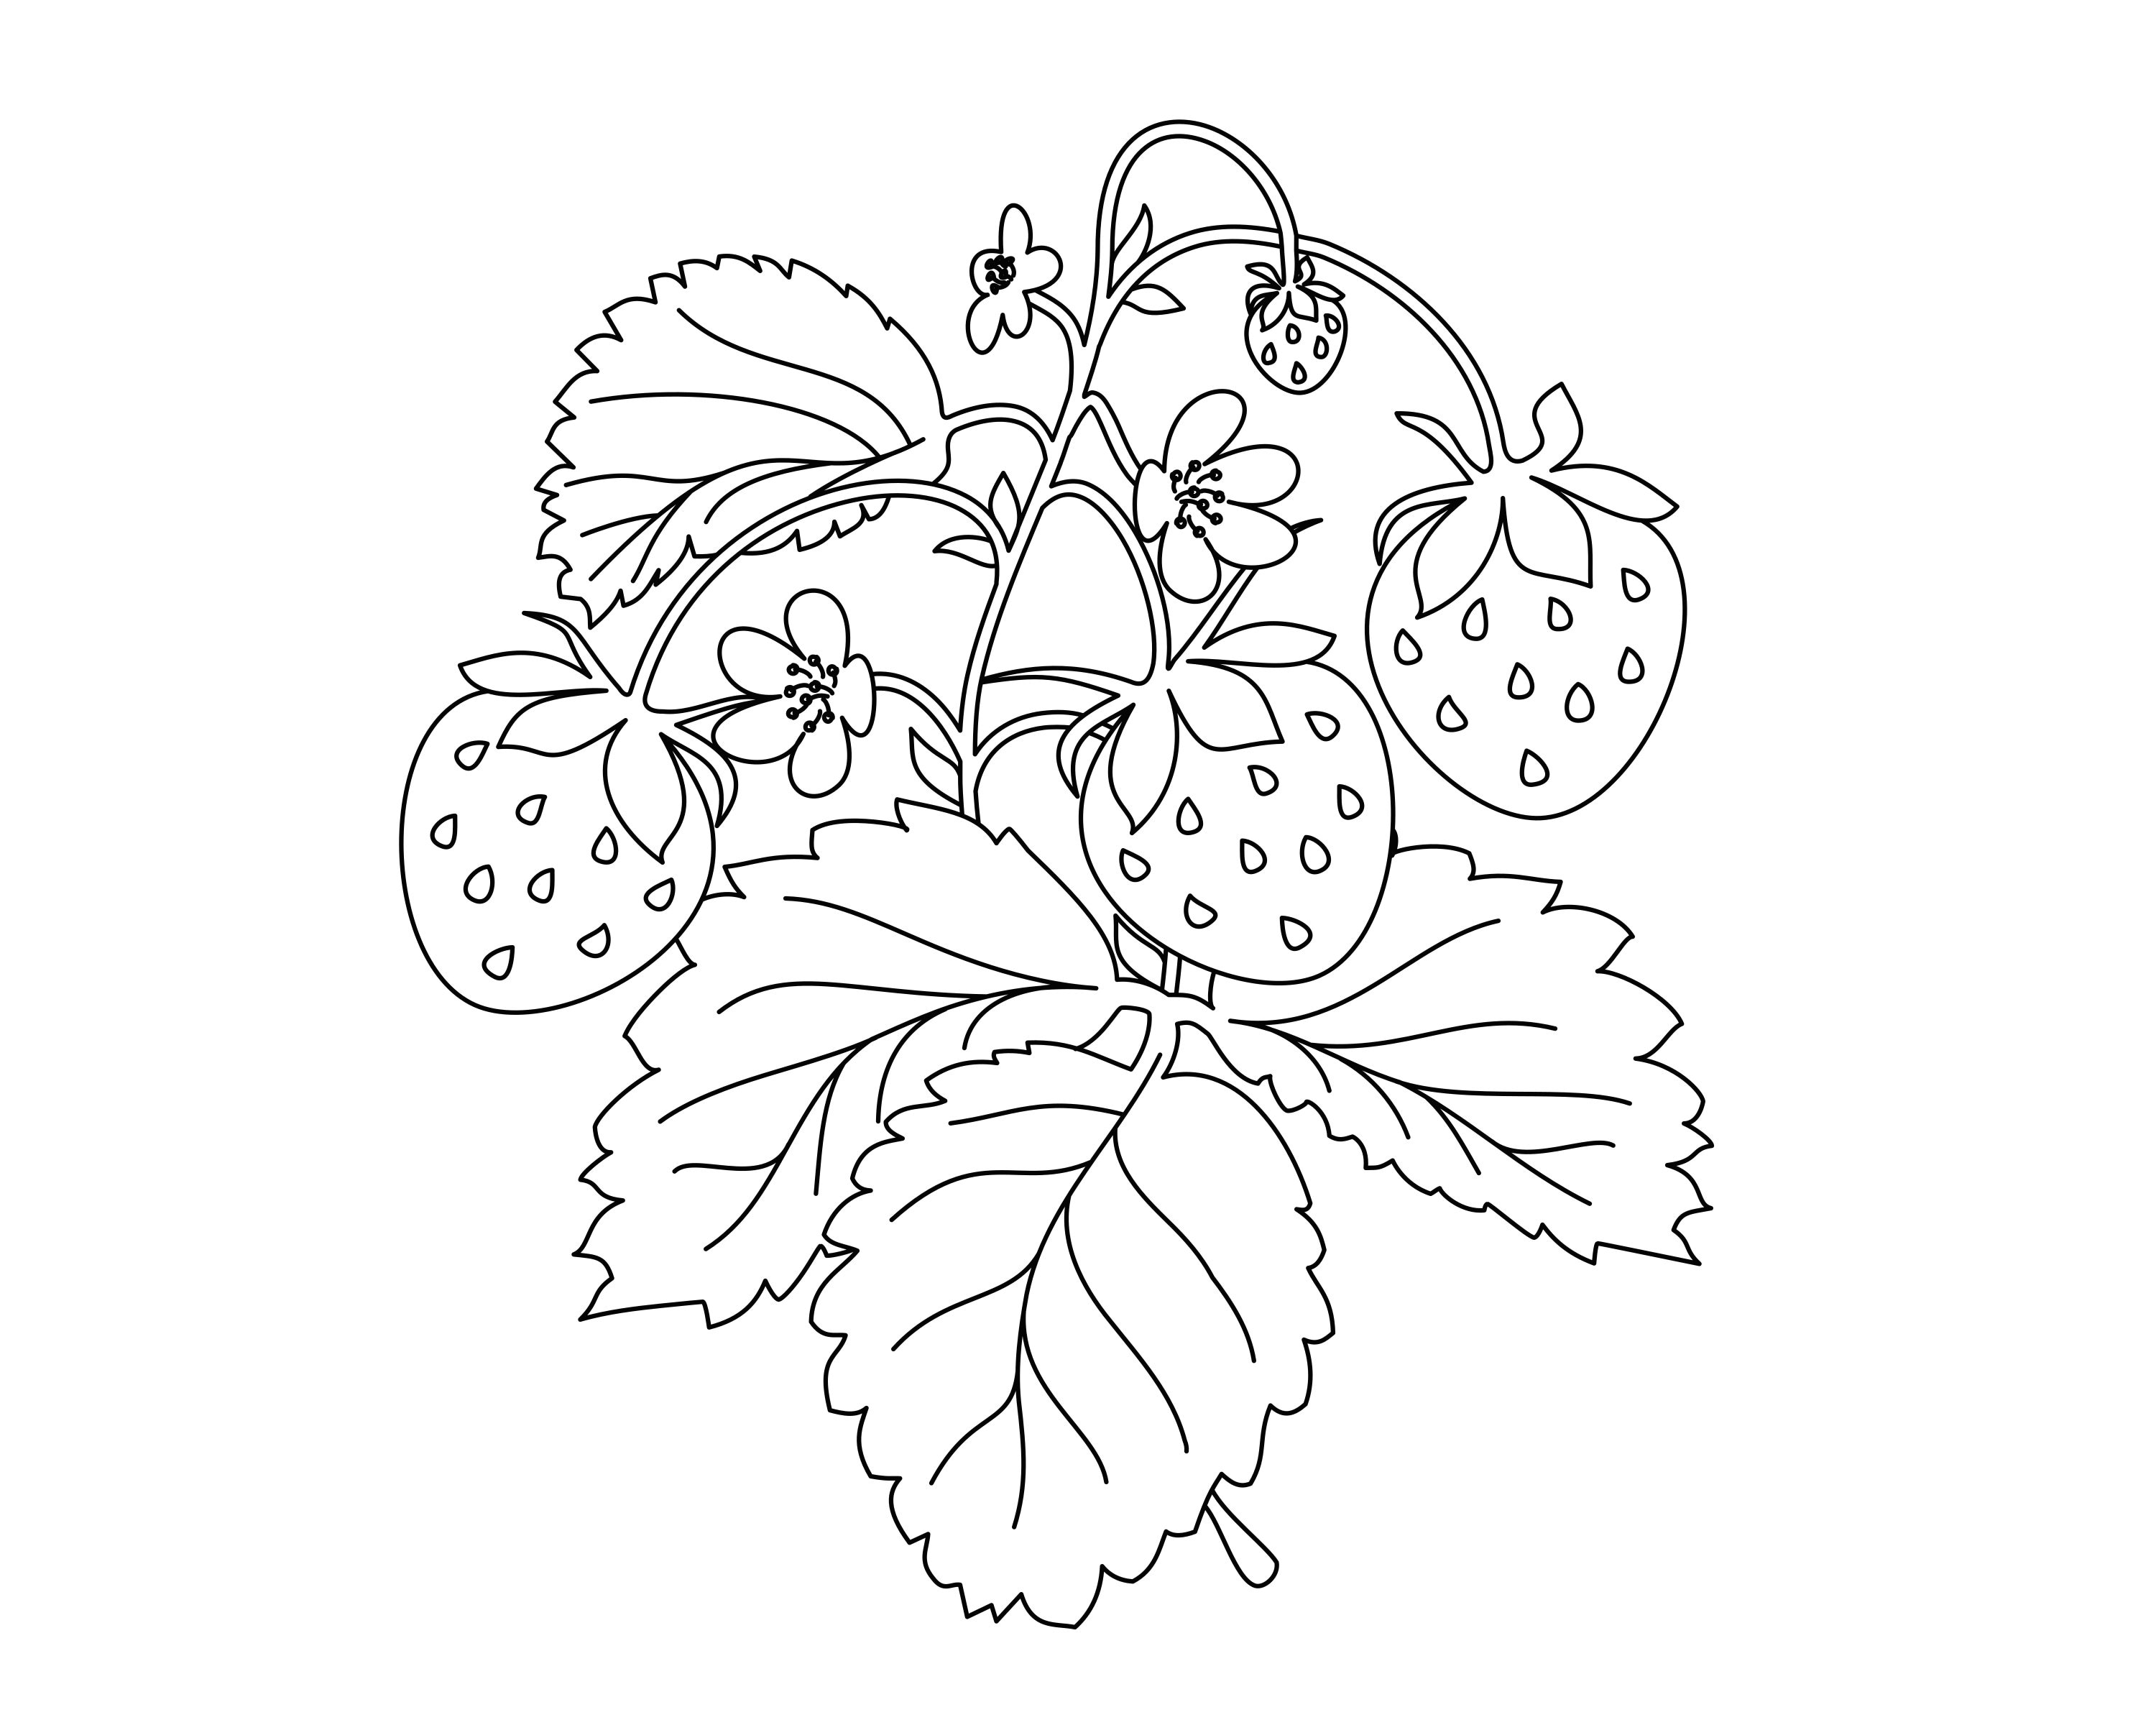 strawberry with plants drawing - Clip Art Library